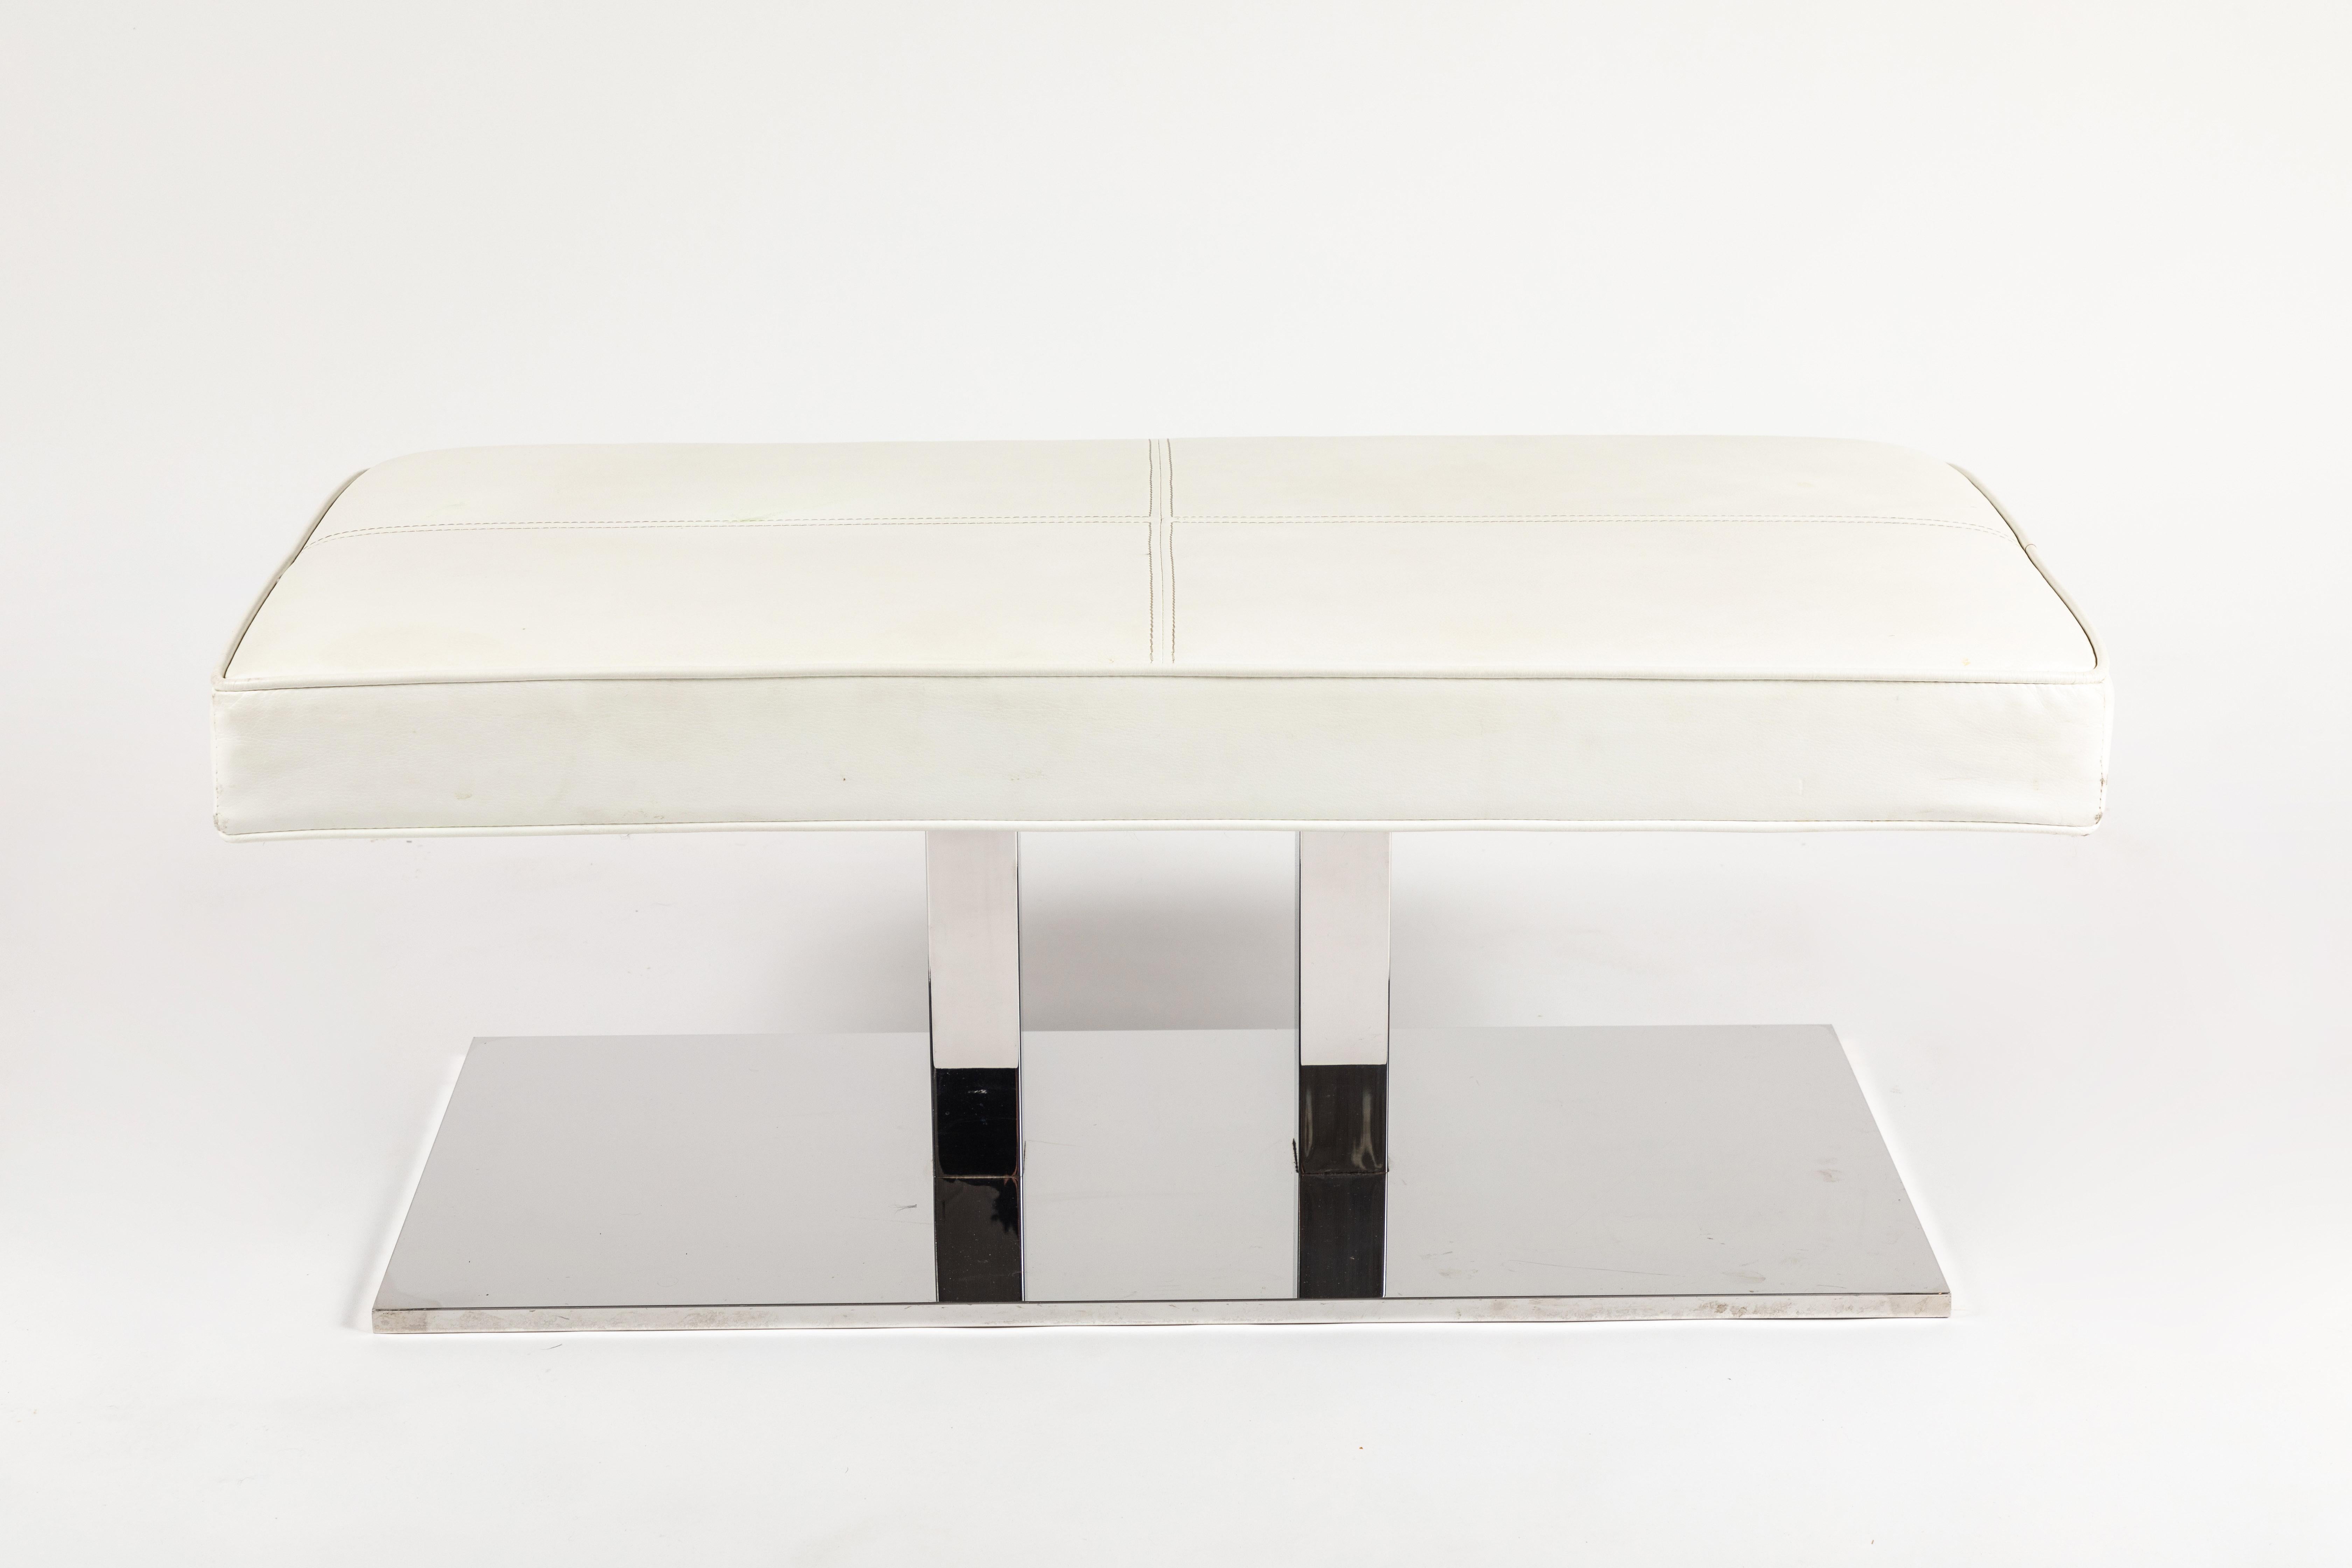 A chic and modern bench designed by Philippe Starck for the SLS hotel in Los Angeles. A highly polished stainless steel base with 2 vertical risers that support the original white faux leather seat featuring baseball stitched details. The seat is